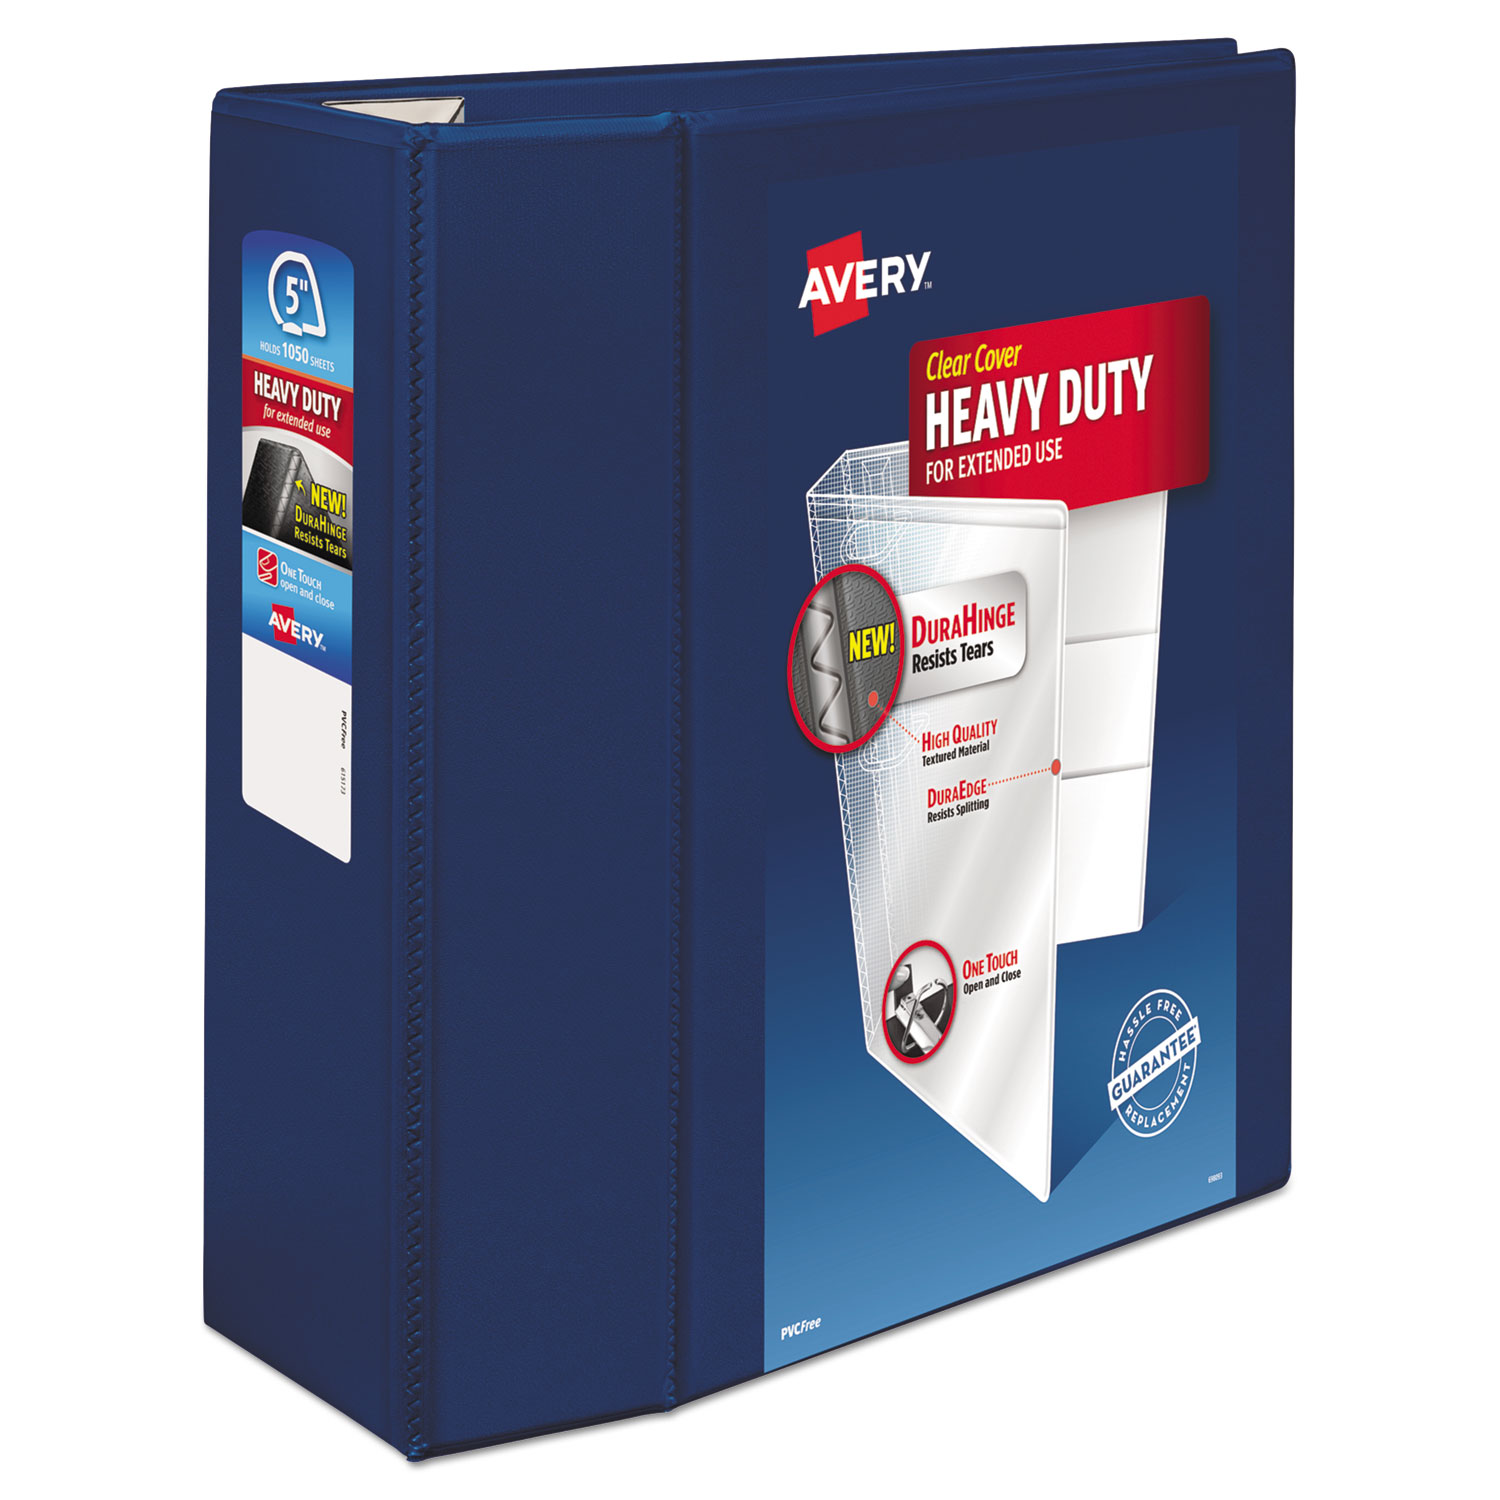  Avery 79806 Heavy-Duty View Binder with DuraHinge and Locking One Touch EZD Rings, 3 Rings, 5 Capacity, 11 x 8.5, Navy Blue (AVE79806) 